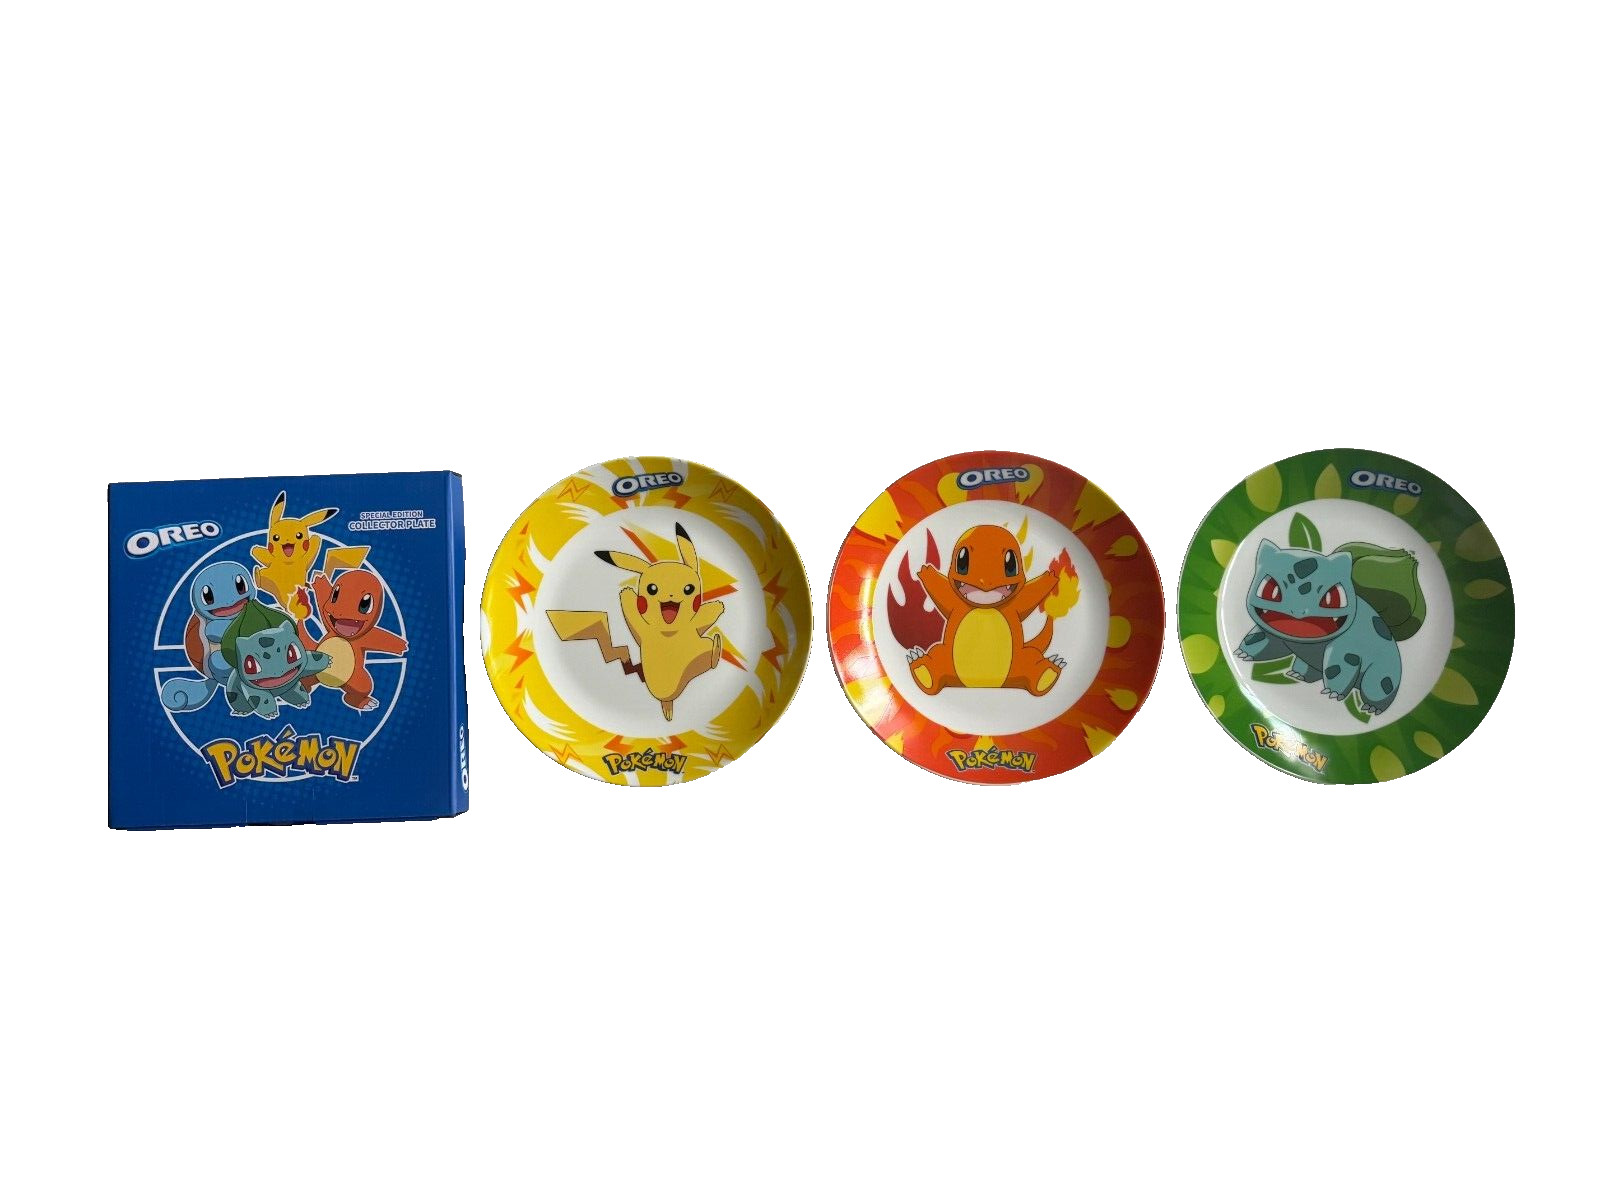 Oreo Pokémon 3 different design pictures plate limited Edition Free FedExpress